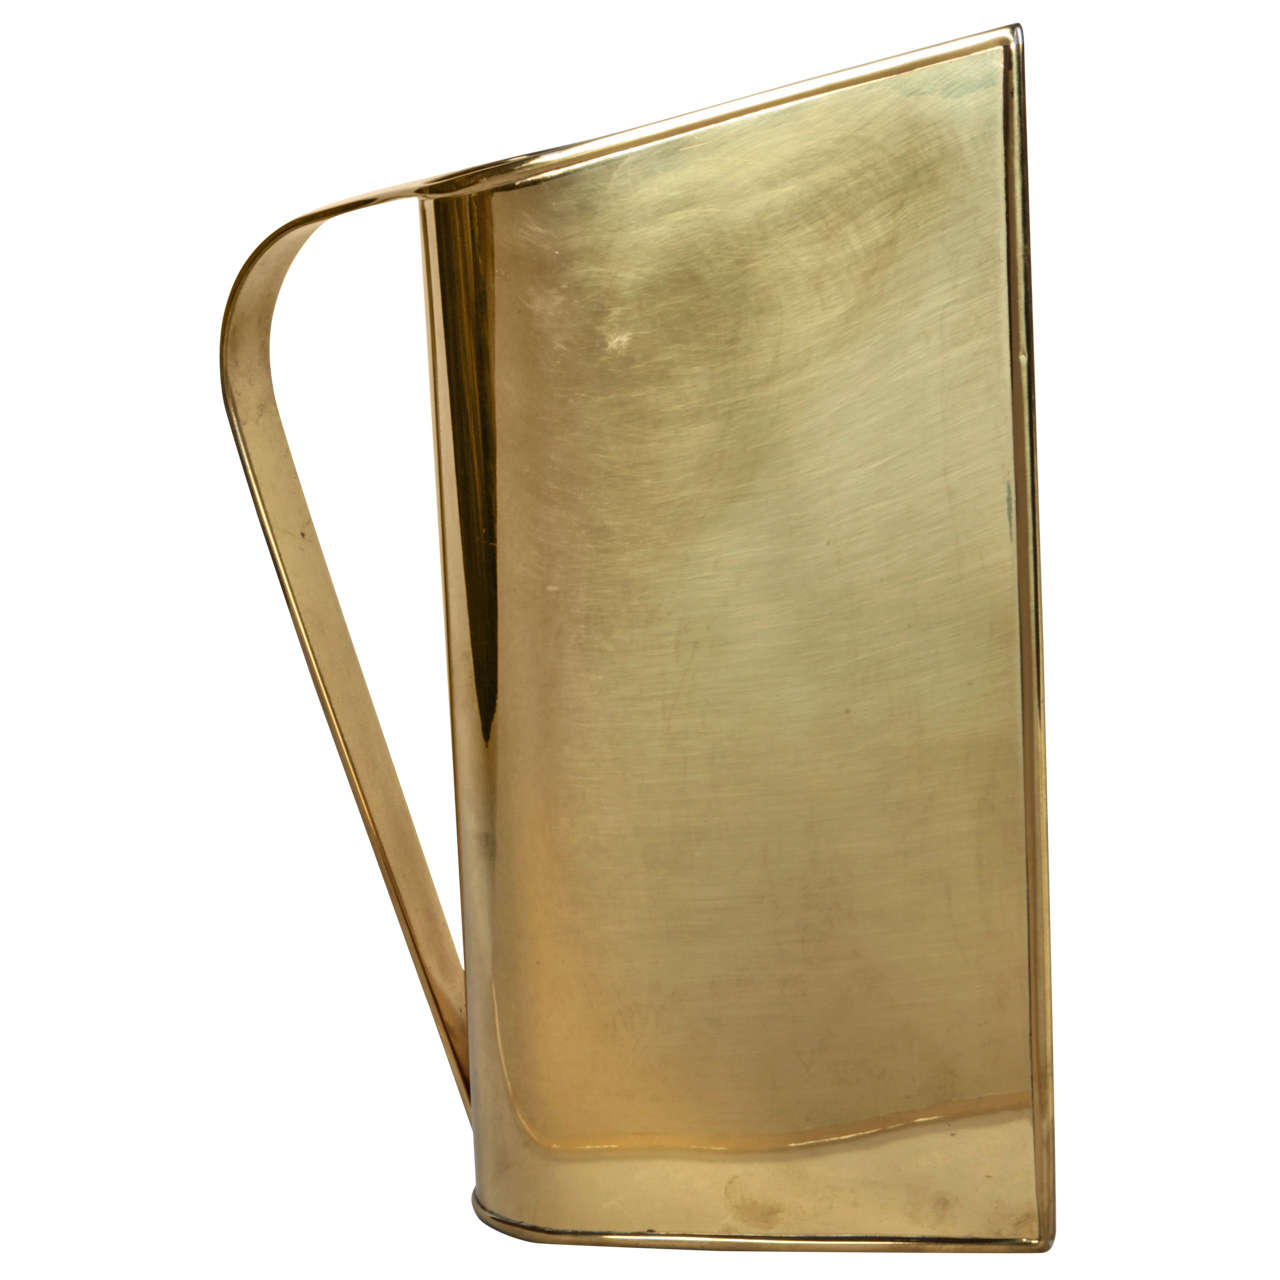 Peter Muller-Munk Rare Brass Normandie Pitcher for Revere c.1935 For Sale